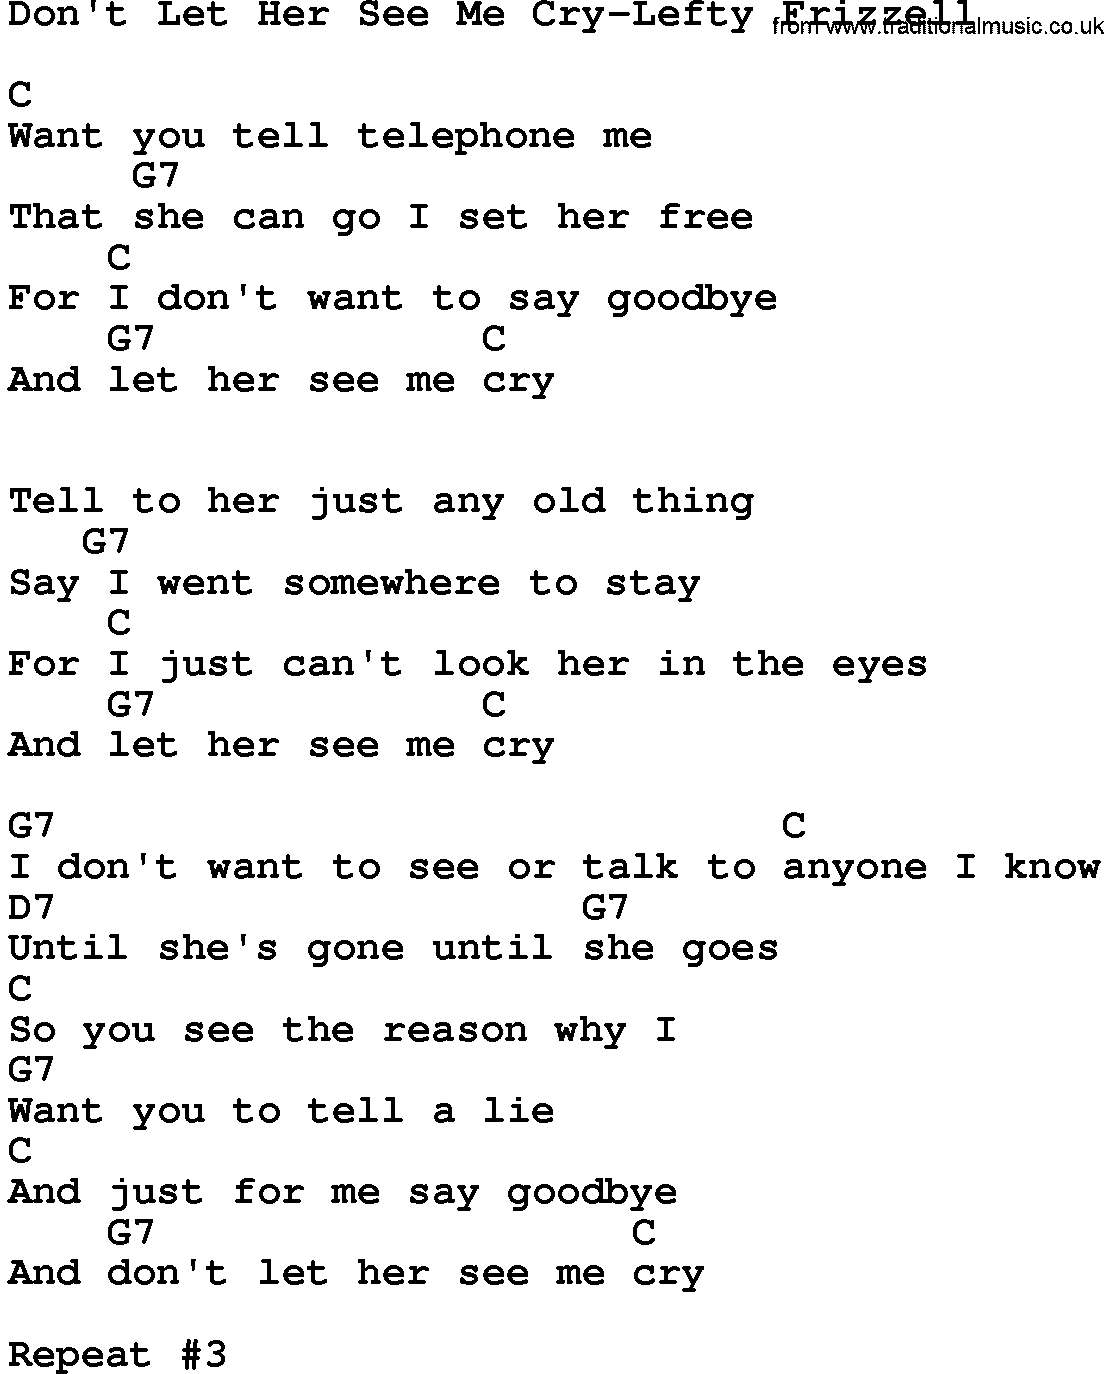 Country music song: Don't Let Her See Me Cry-Lefty Frizzell lyrics and chords